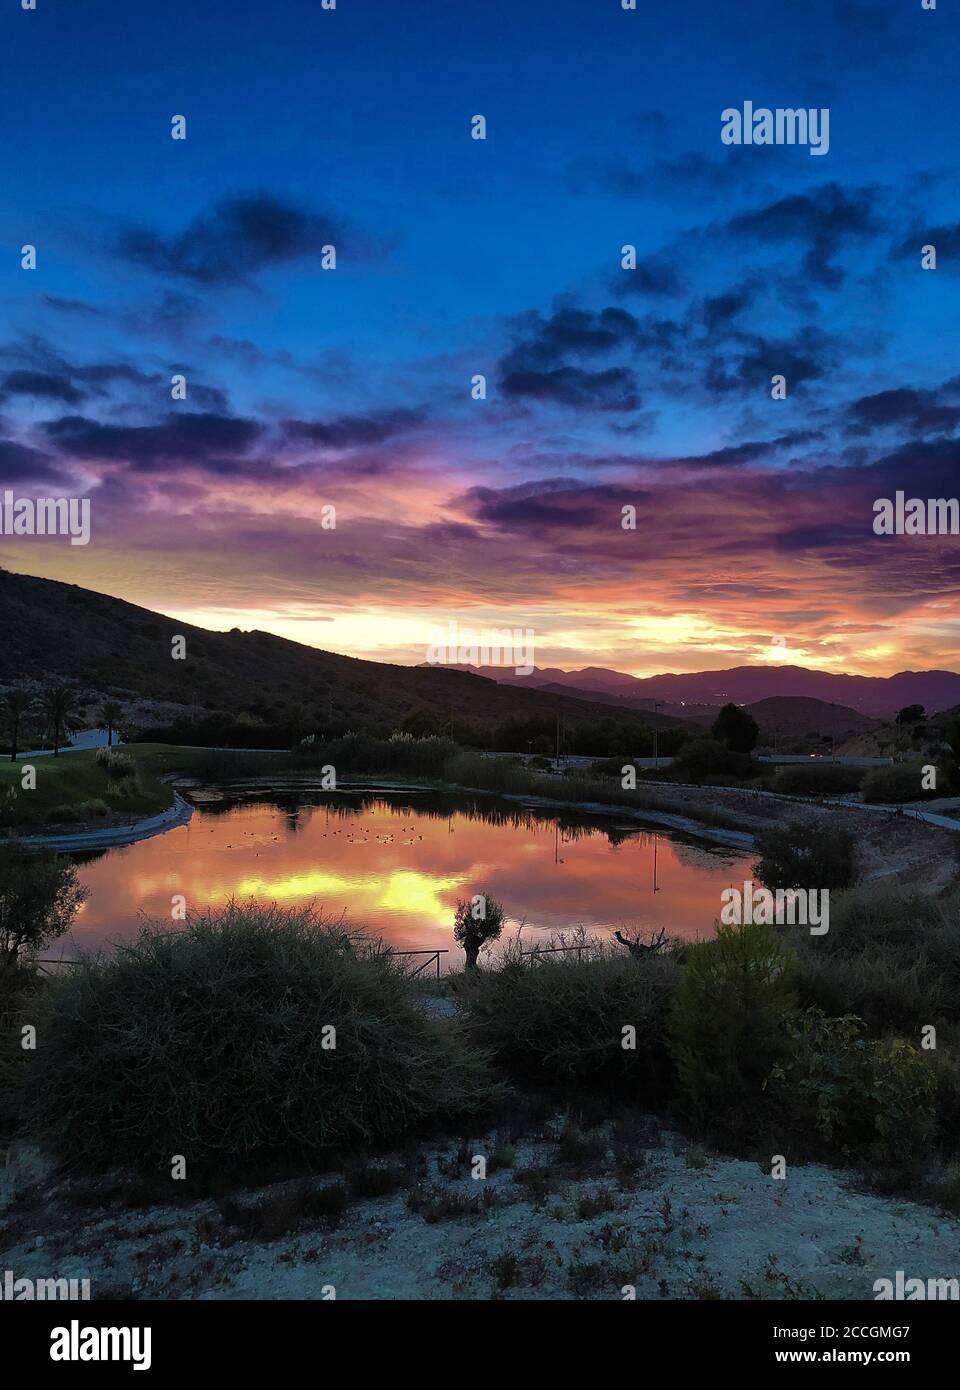 Sunset in the mountains of Monforte del Cid, in the province of Alicante in Spain. Stock Photo